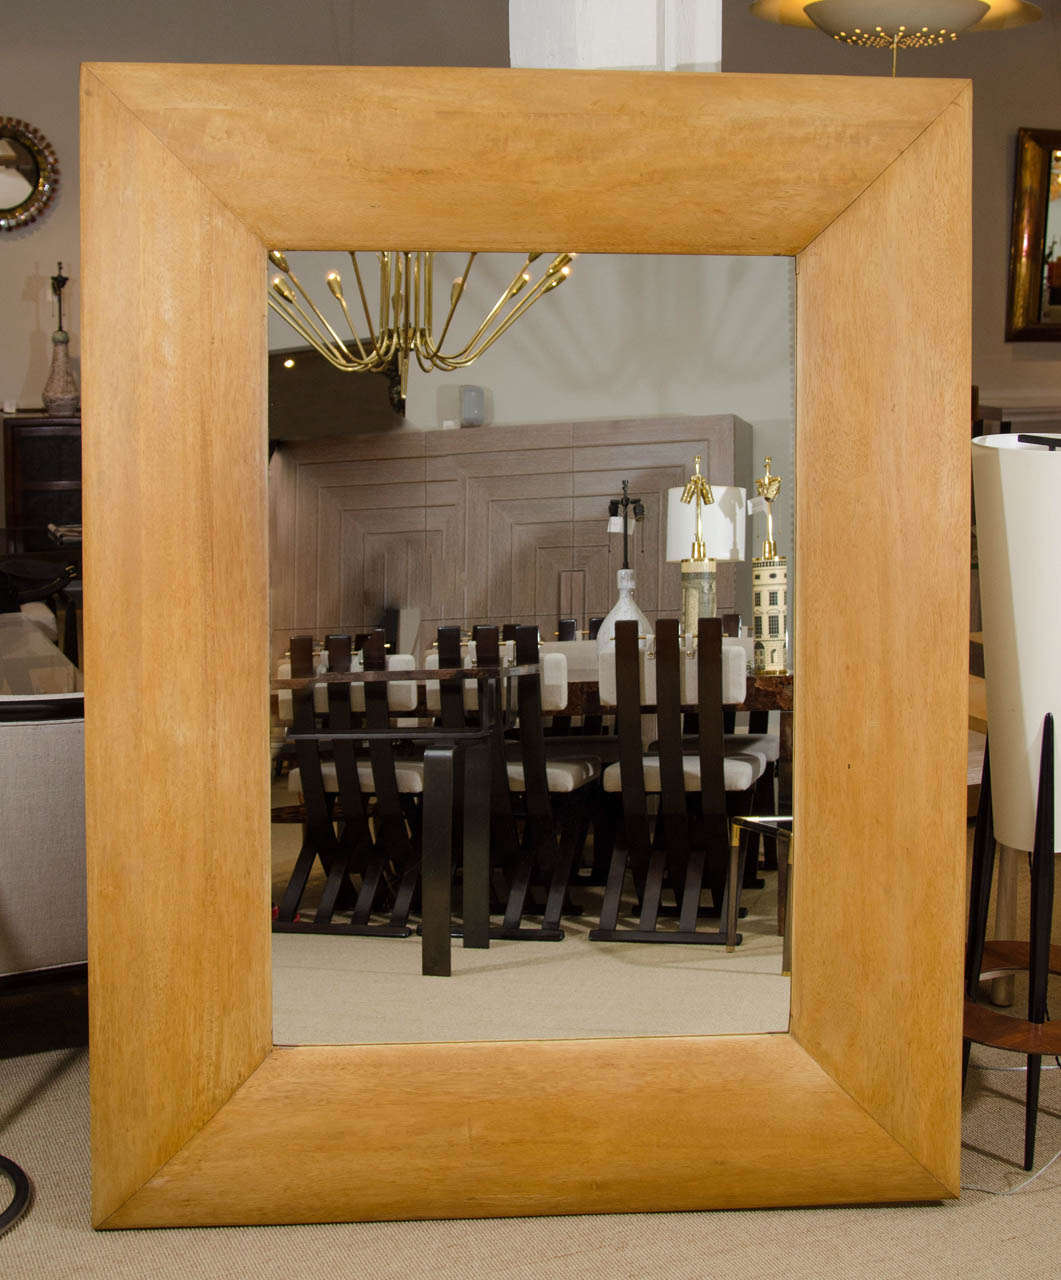 Large Bleached Mahogany Mirror, France, c. 1950’s
68 by 53 in. The wood frame is 12